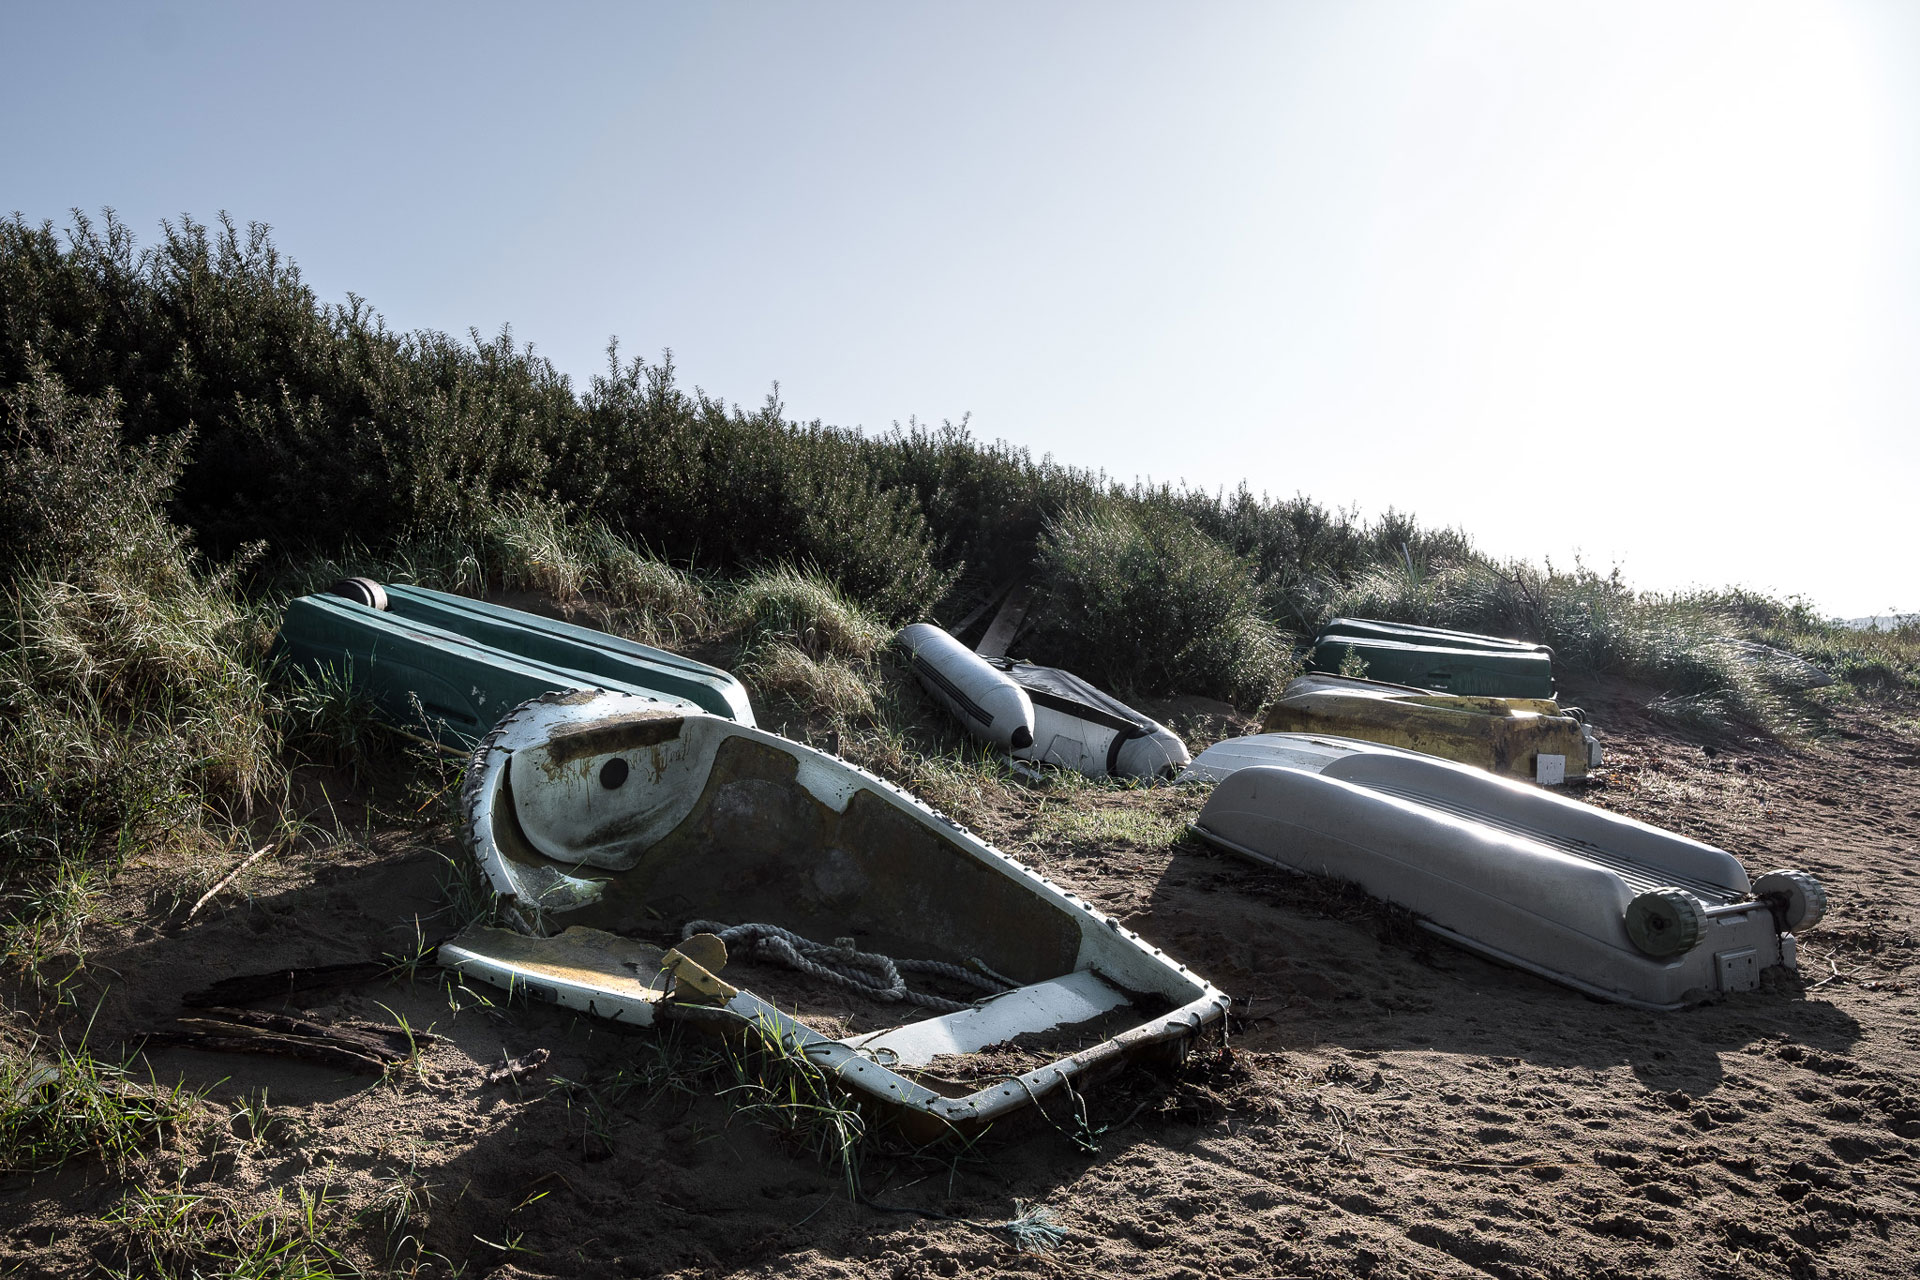 Along The Way Photographic Documentary Damaged Boats at Uphill